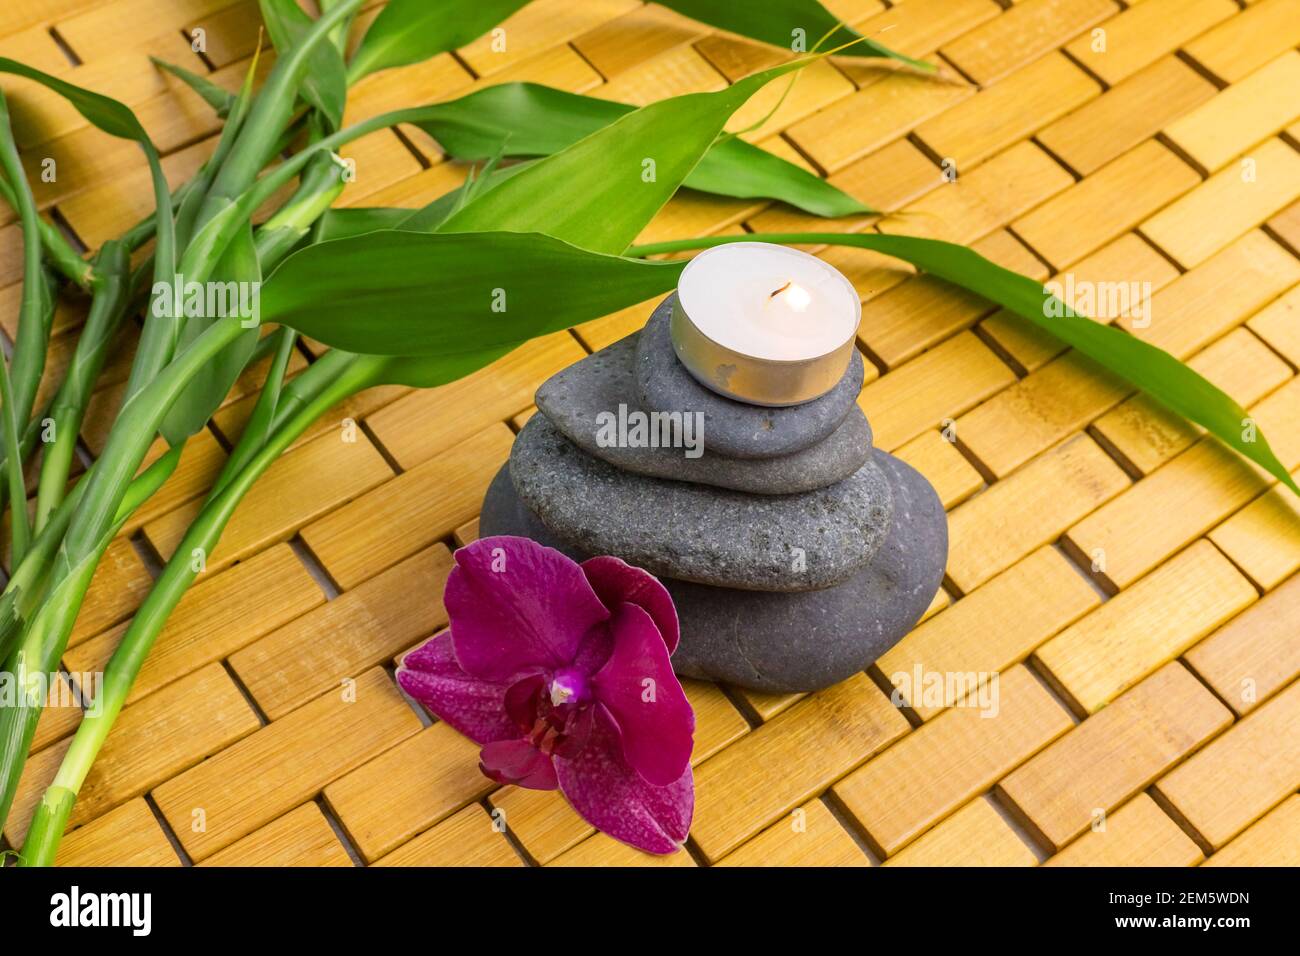 Spa, zen, massage concept. Bamboo leaves, black stones, purple orchid, candle on wood background Stock Photo